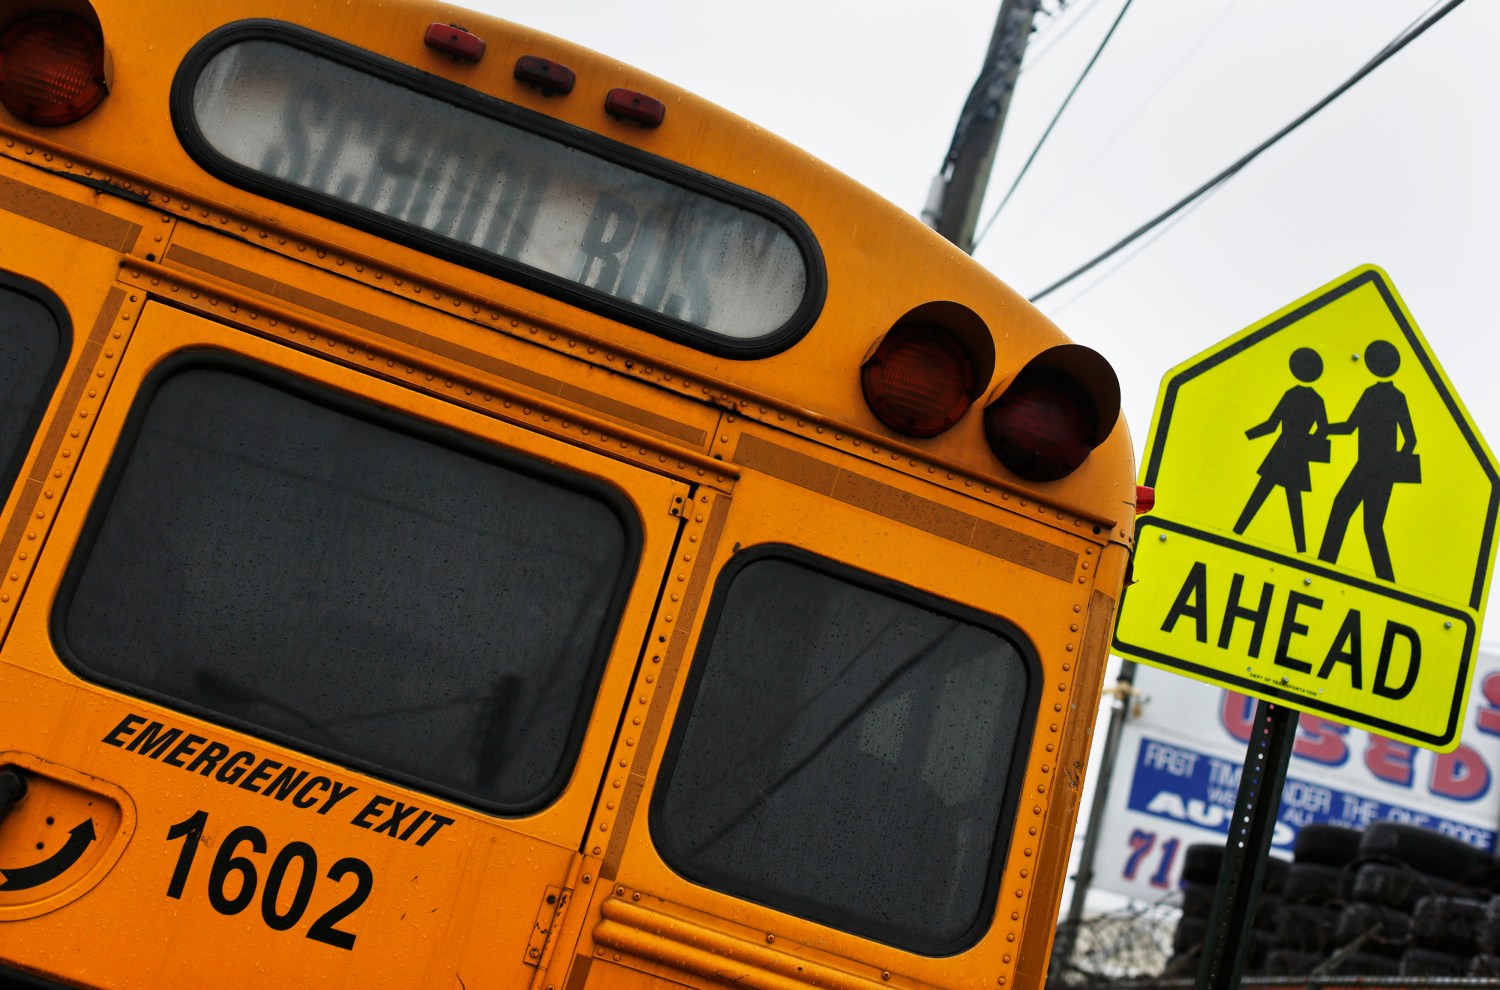 A school bus sits parked along a street in the Queens borough of New York January 16, 2013. For the first time in 34 years, New York City bus drivers went on strike, stranding up to 152,000 students in the nation's largest public school system on sleet-soaked Wednesday morning.   REUTERS/Shannon Stapleton (UNITED STATES - Tags: EDUCATION CIVIL UNREST BUSINESS EMPLOYMENT) - GM1E91H00RI01